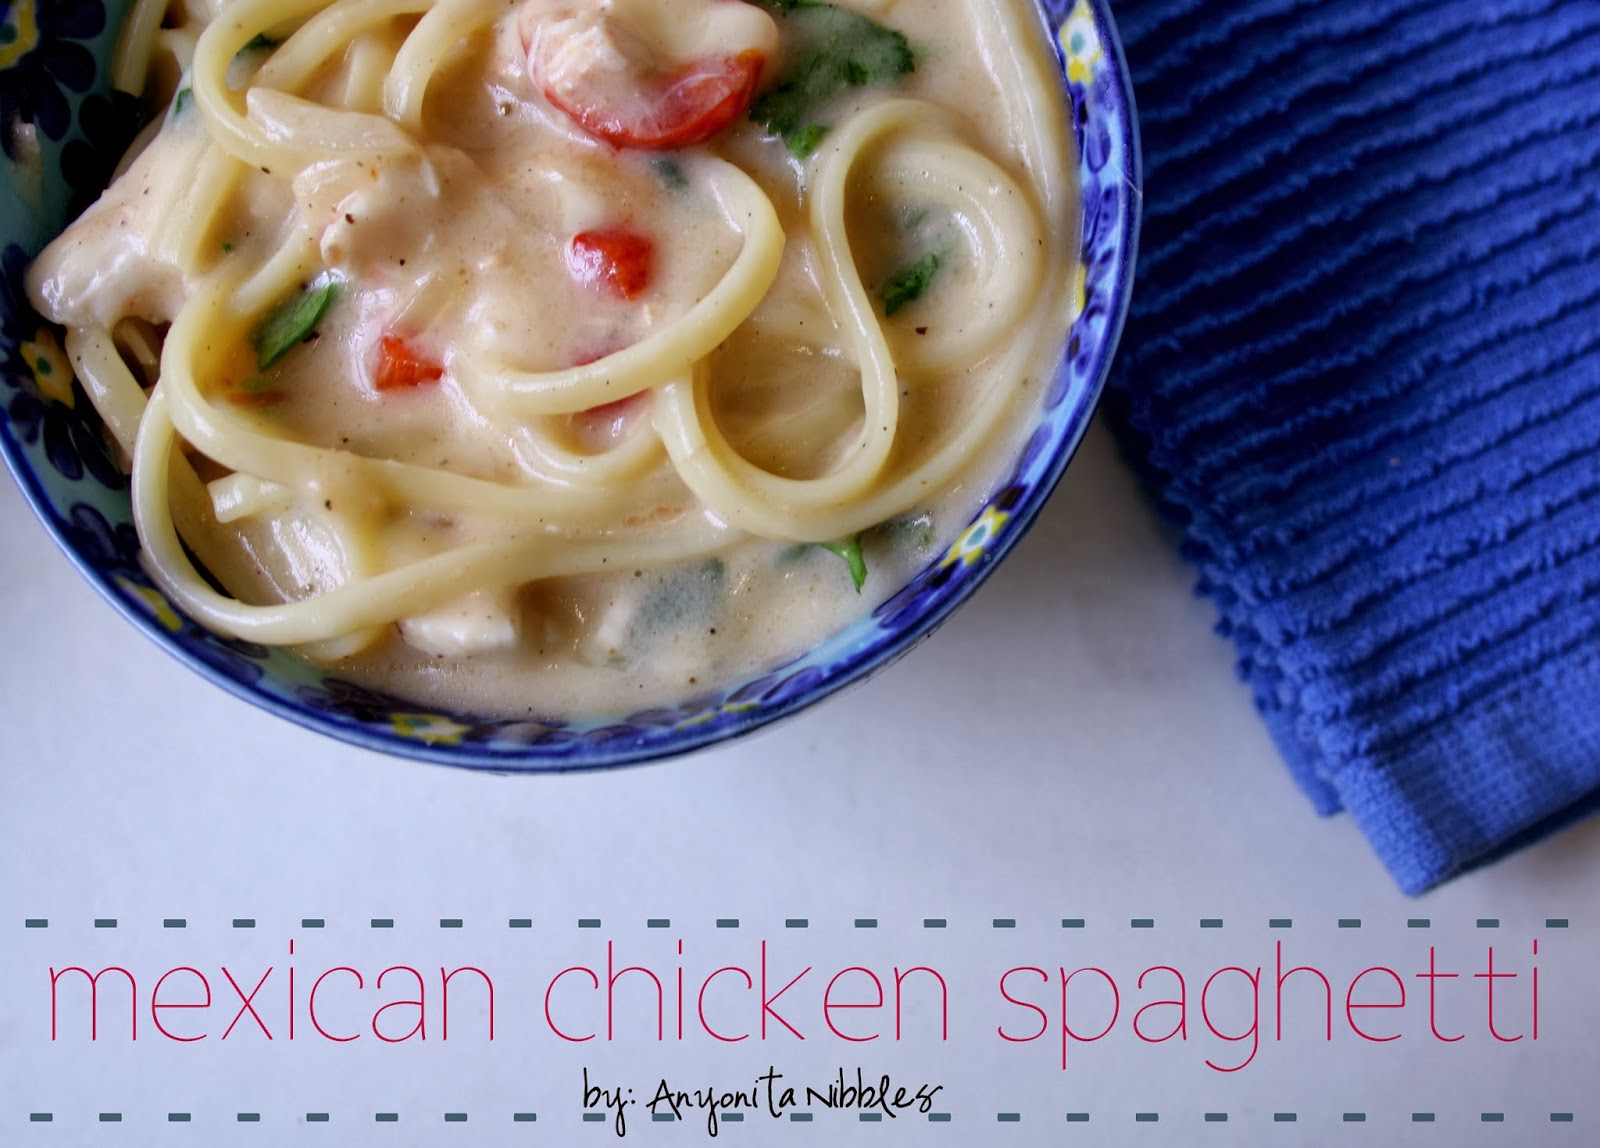 A bowl of creamy Mexican chicken spaghetti ready in under 20 minutes and filling!